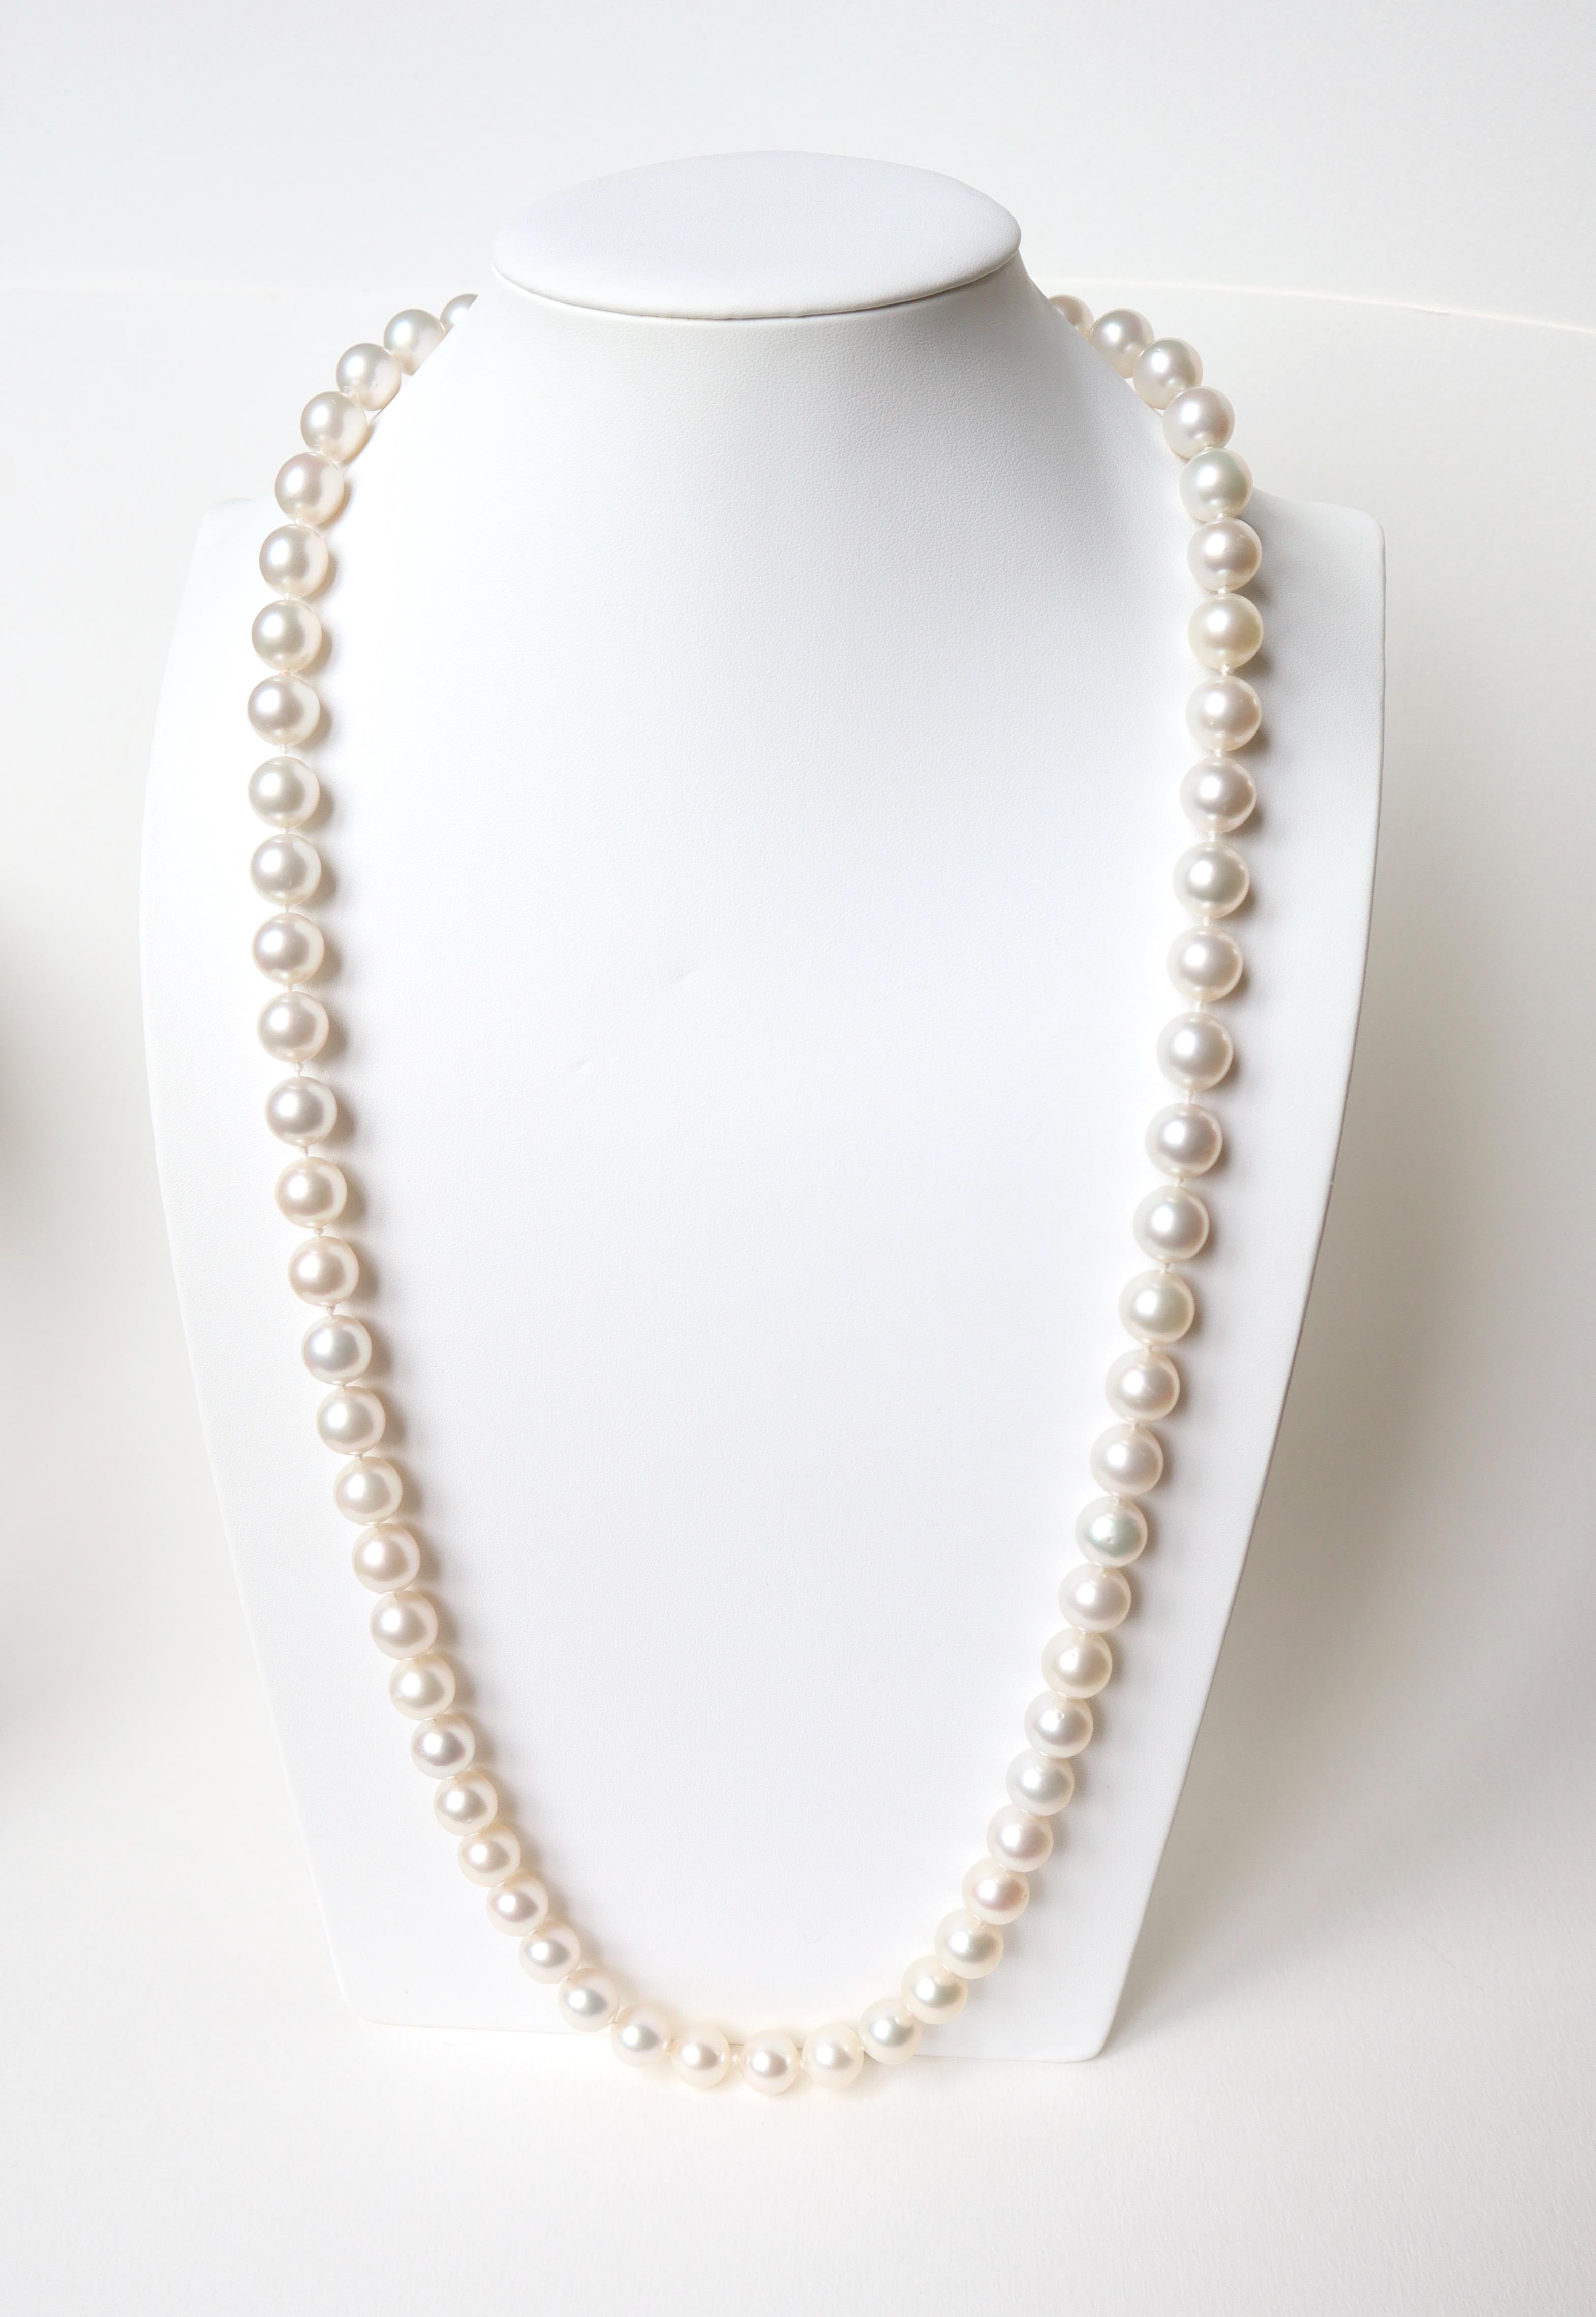 Necklace of natural white cultured Pearls. 65 non treated Pearls Diameter 12-13 mm
Length 84cm 
Invisible  18 kt White Gold clasp
Gross weight: 184.7g